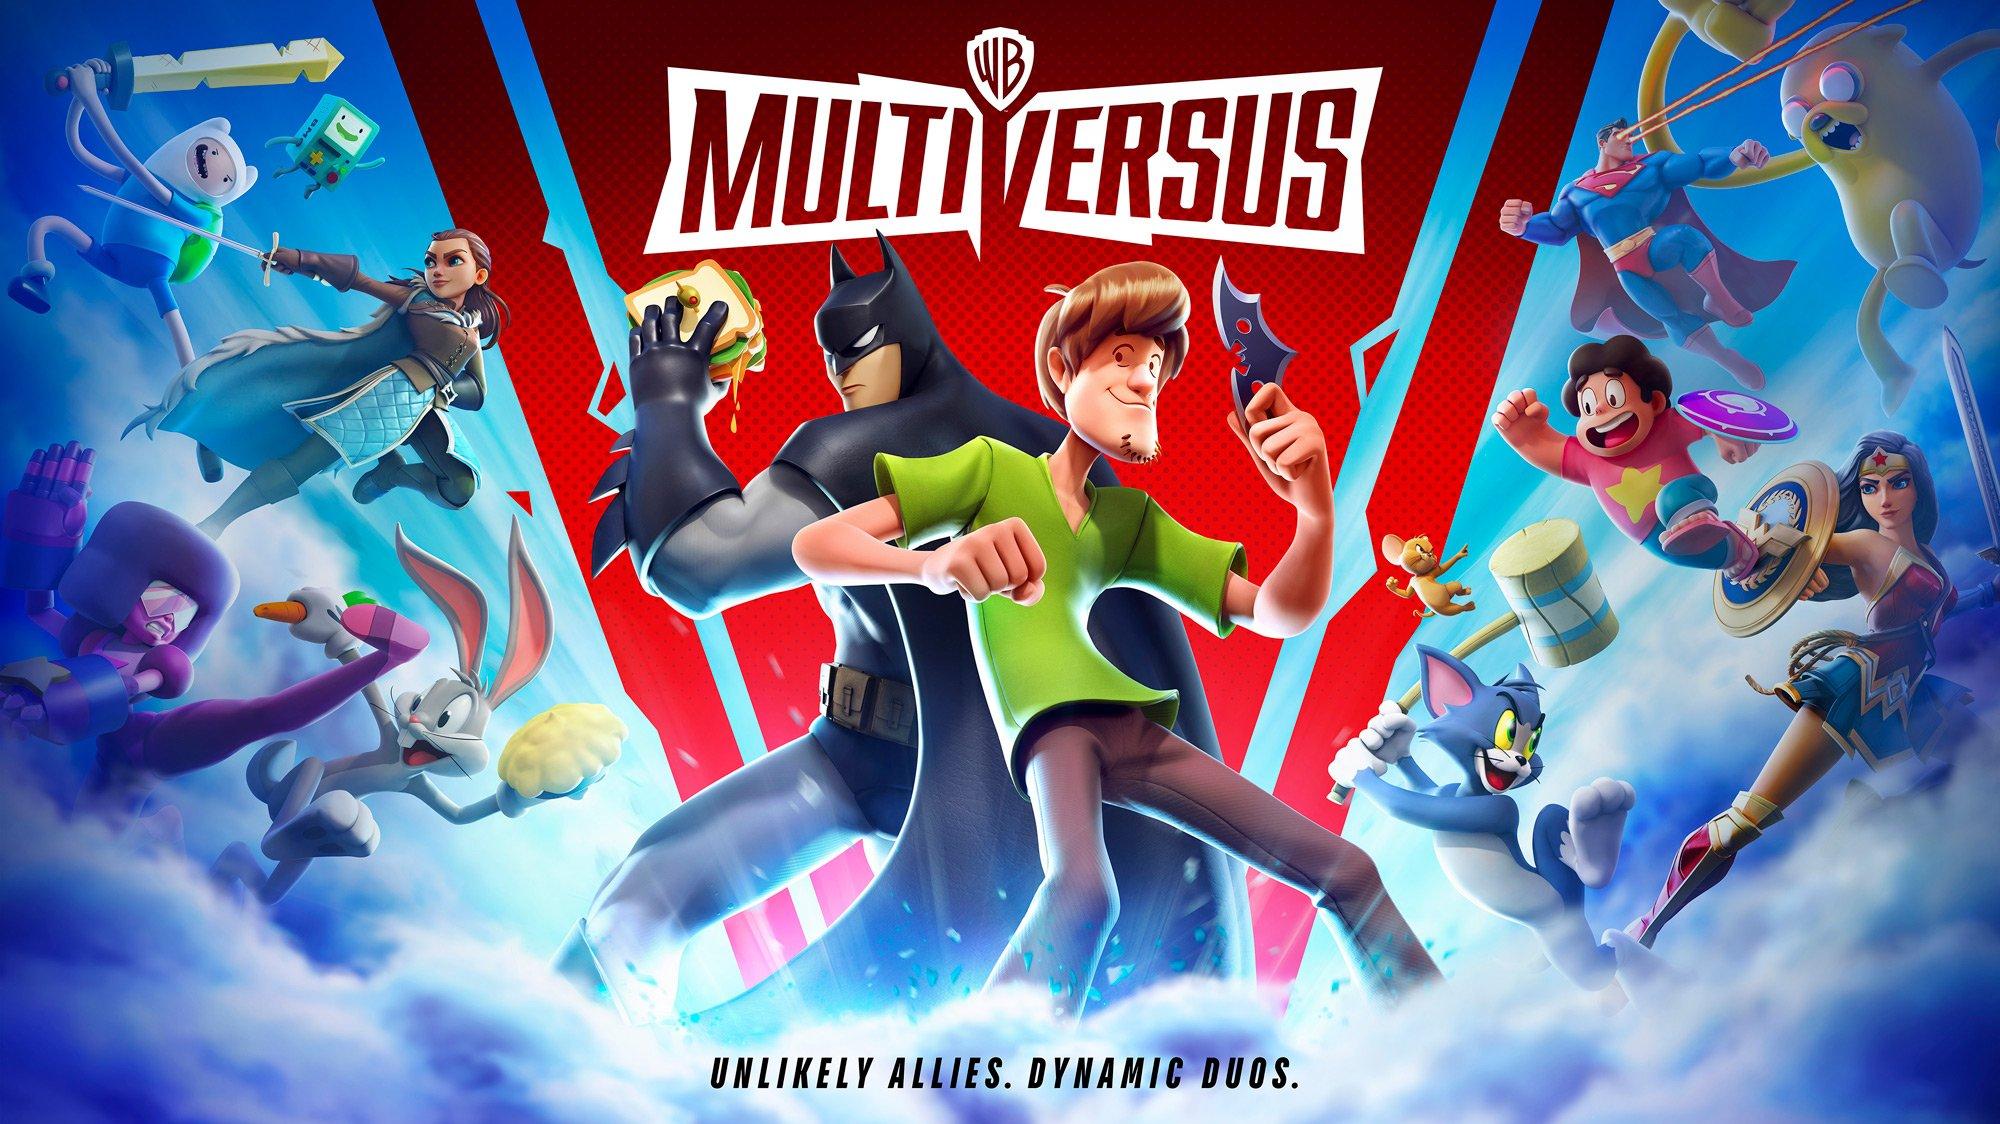 Warner Bros. Games' new videogame 'MultiVersus' will let players